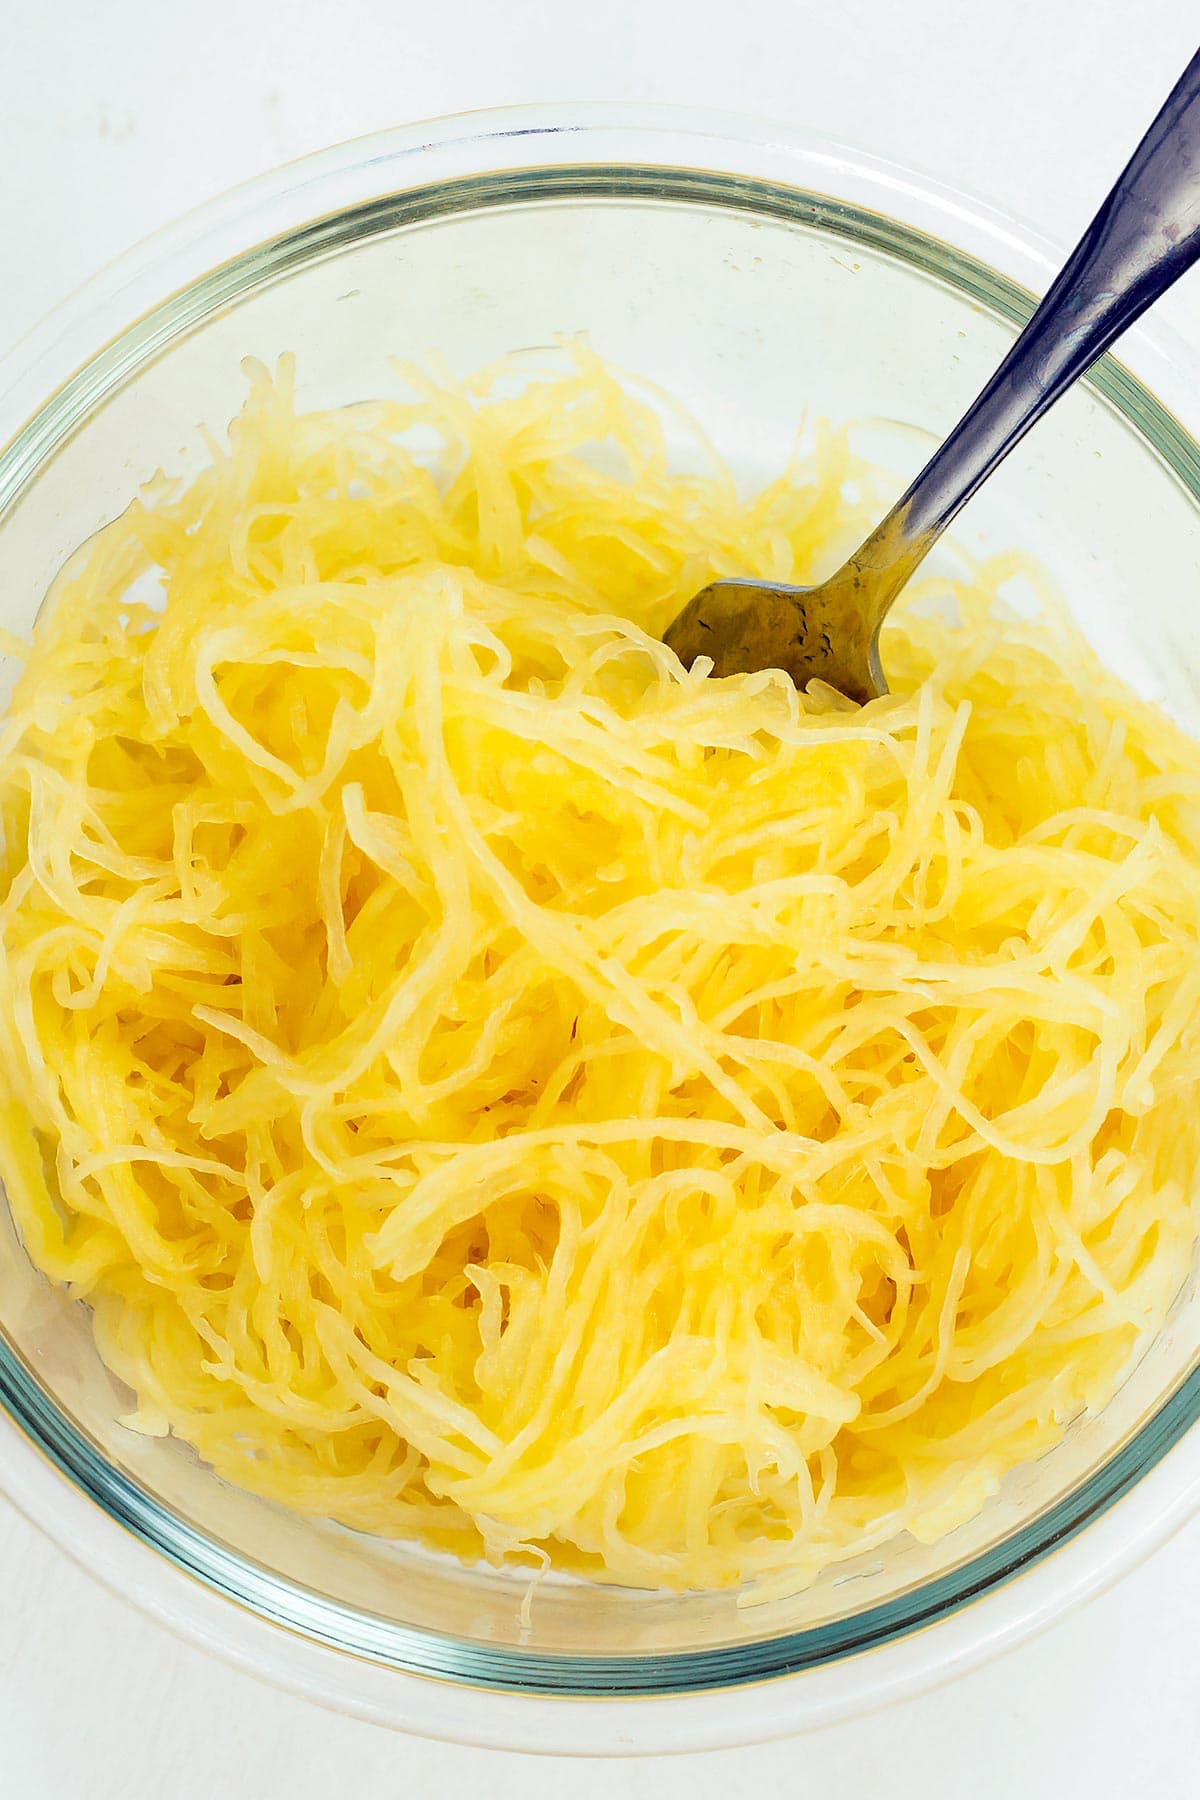 Cooked spaghetti squash noodles in bowl